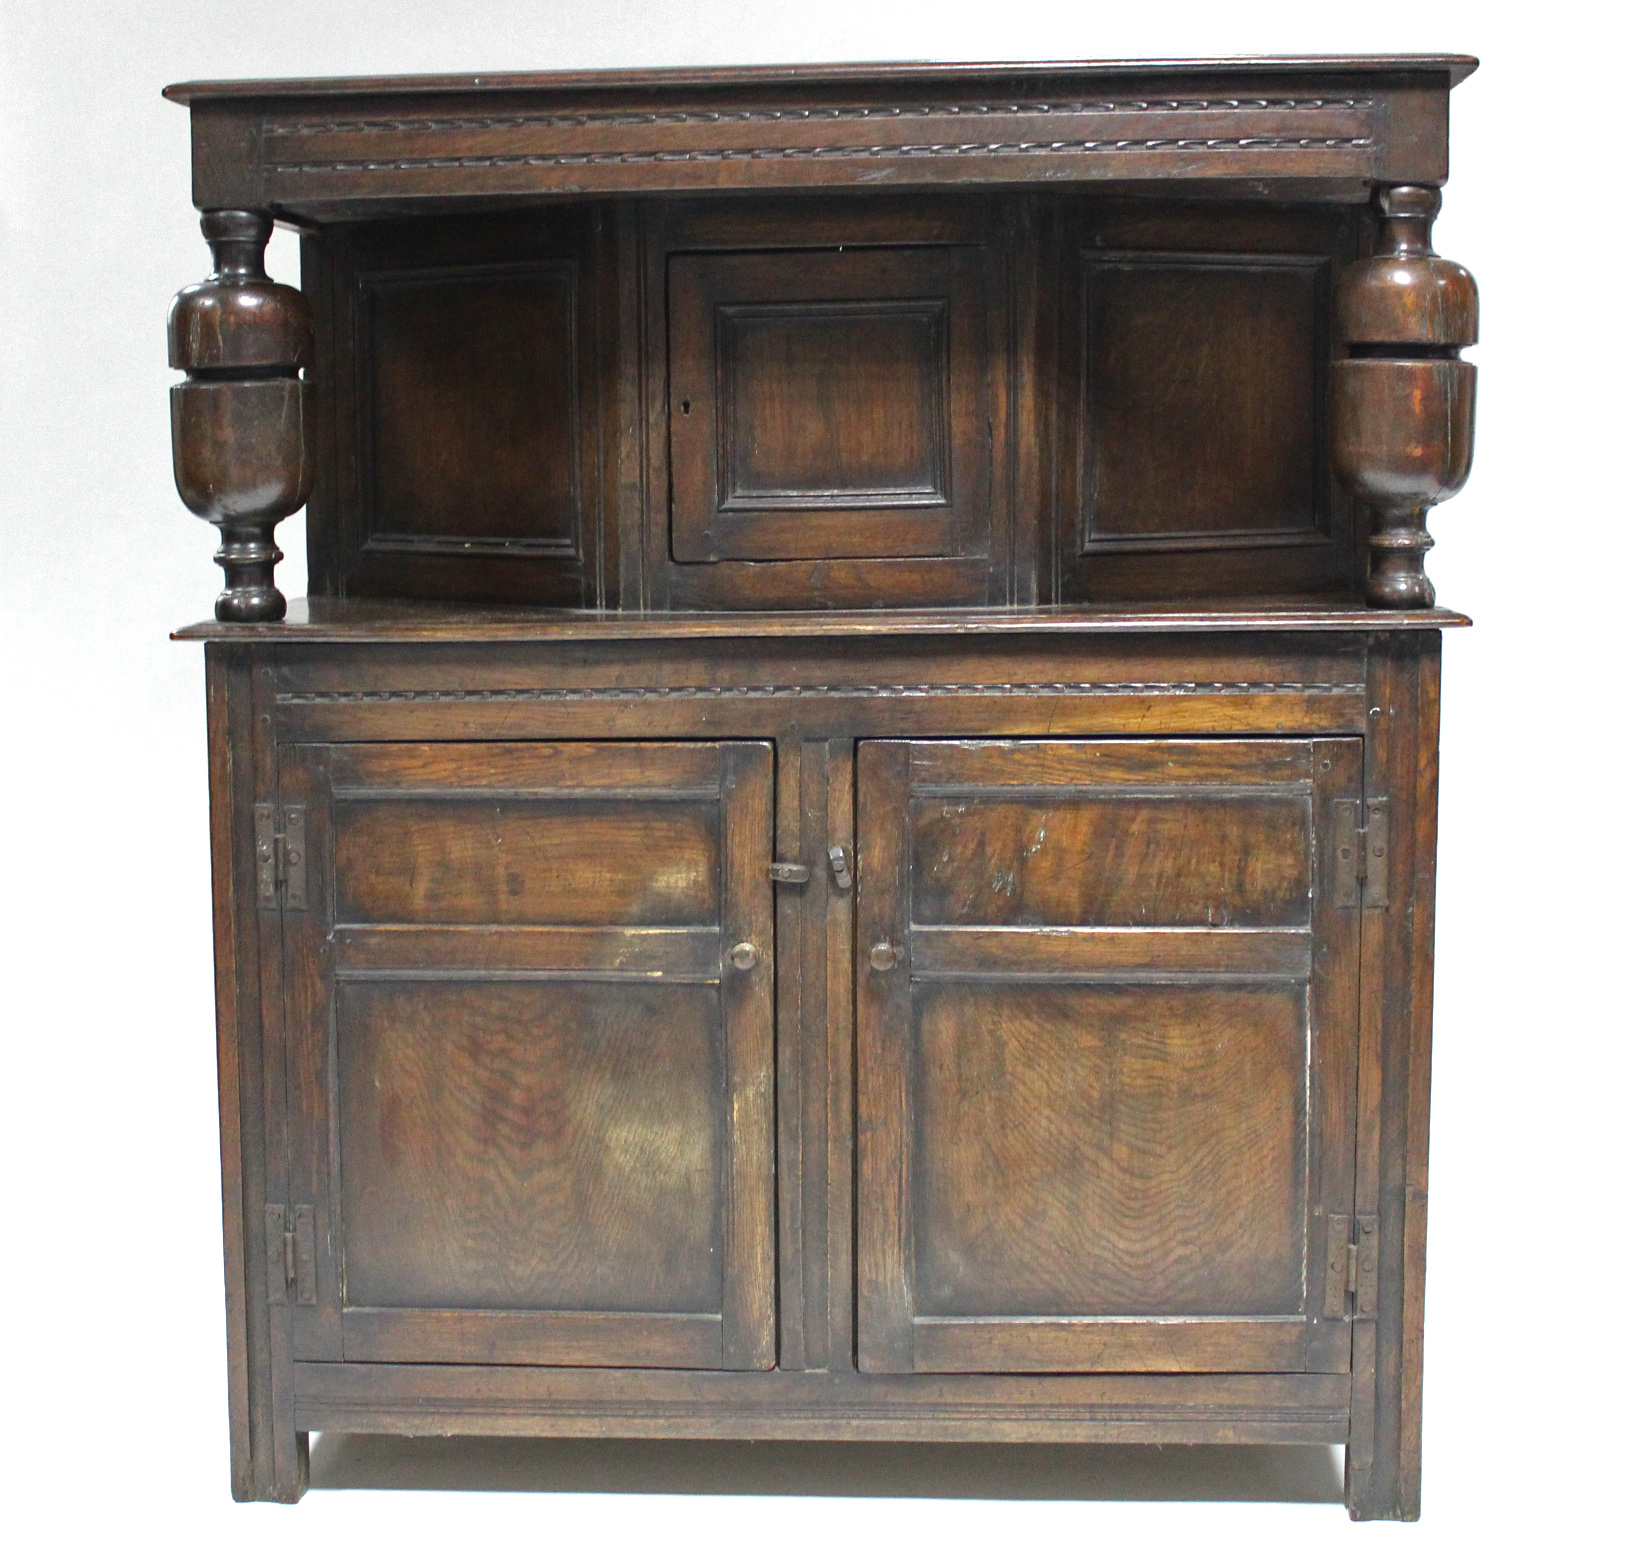 A 17th century-style joined oak court cupboard, the upper part with craved frieze & central panel - Image 2 of 8